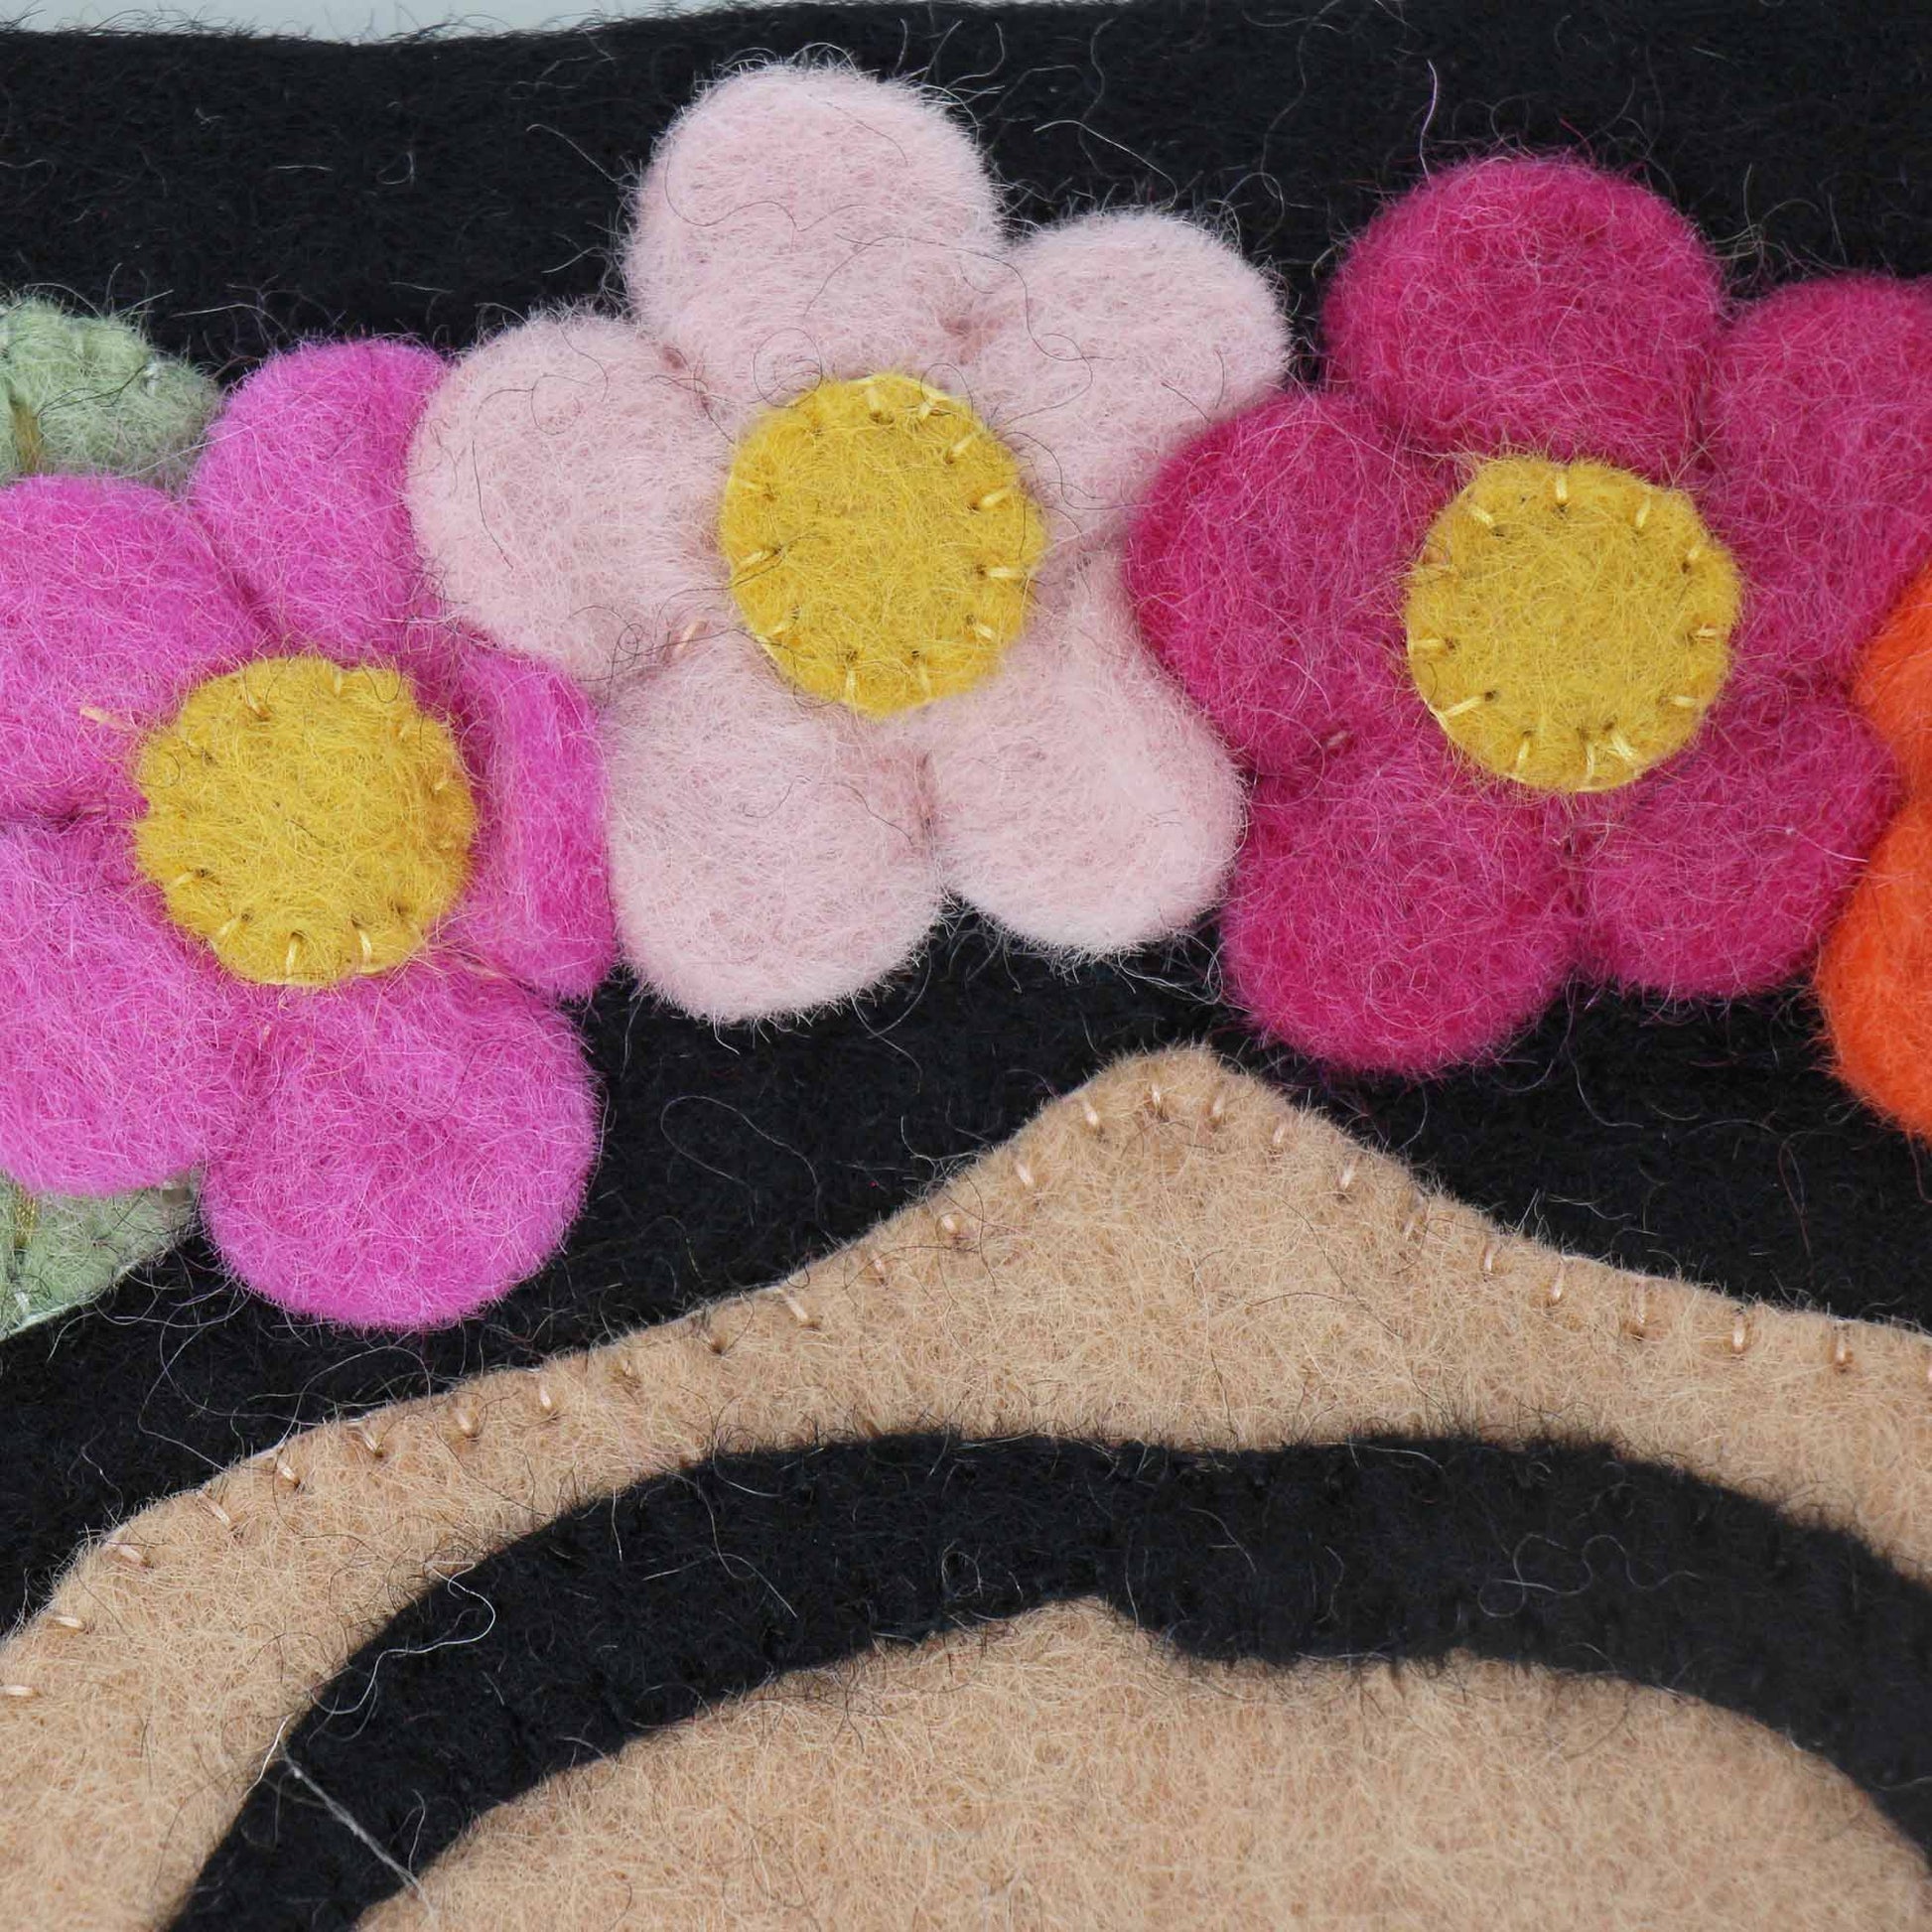 Hand Crafted Felt: Frida Pouch - Linda Kay Gifford’s - Those Nasty Women TALK! by SWEETSurvivor